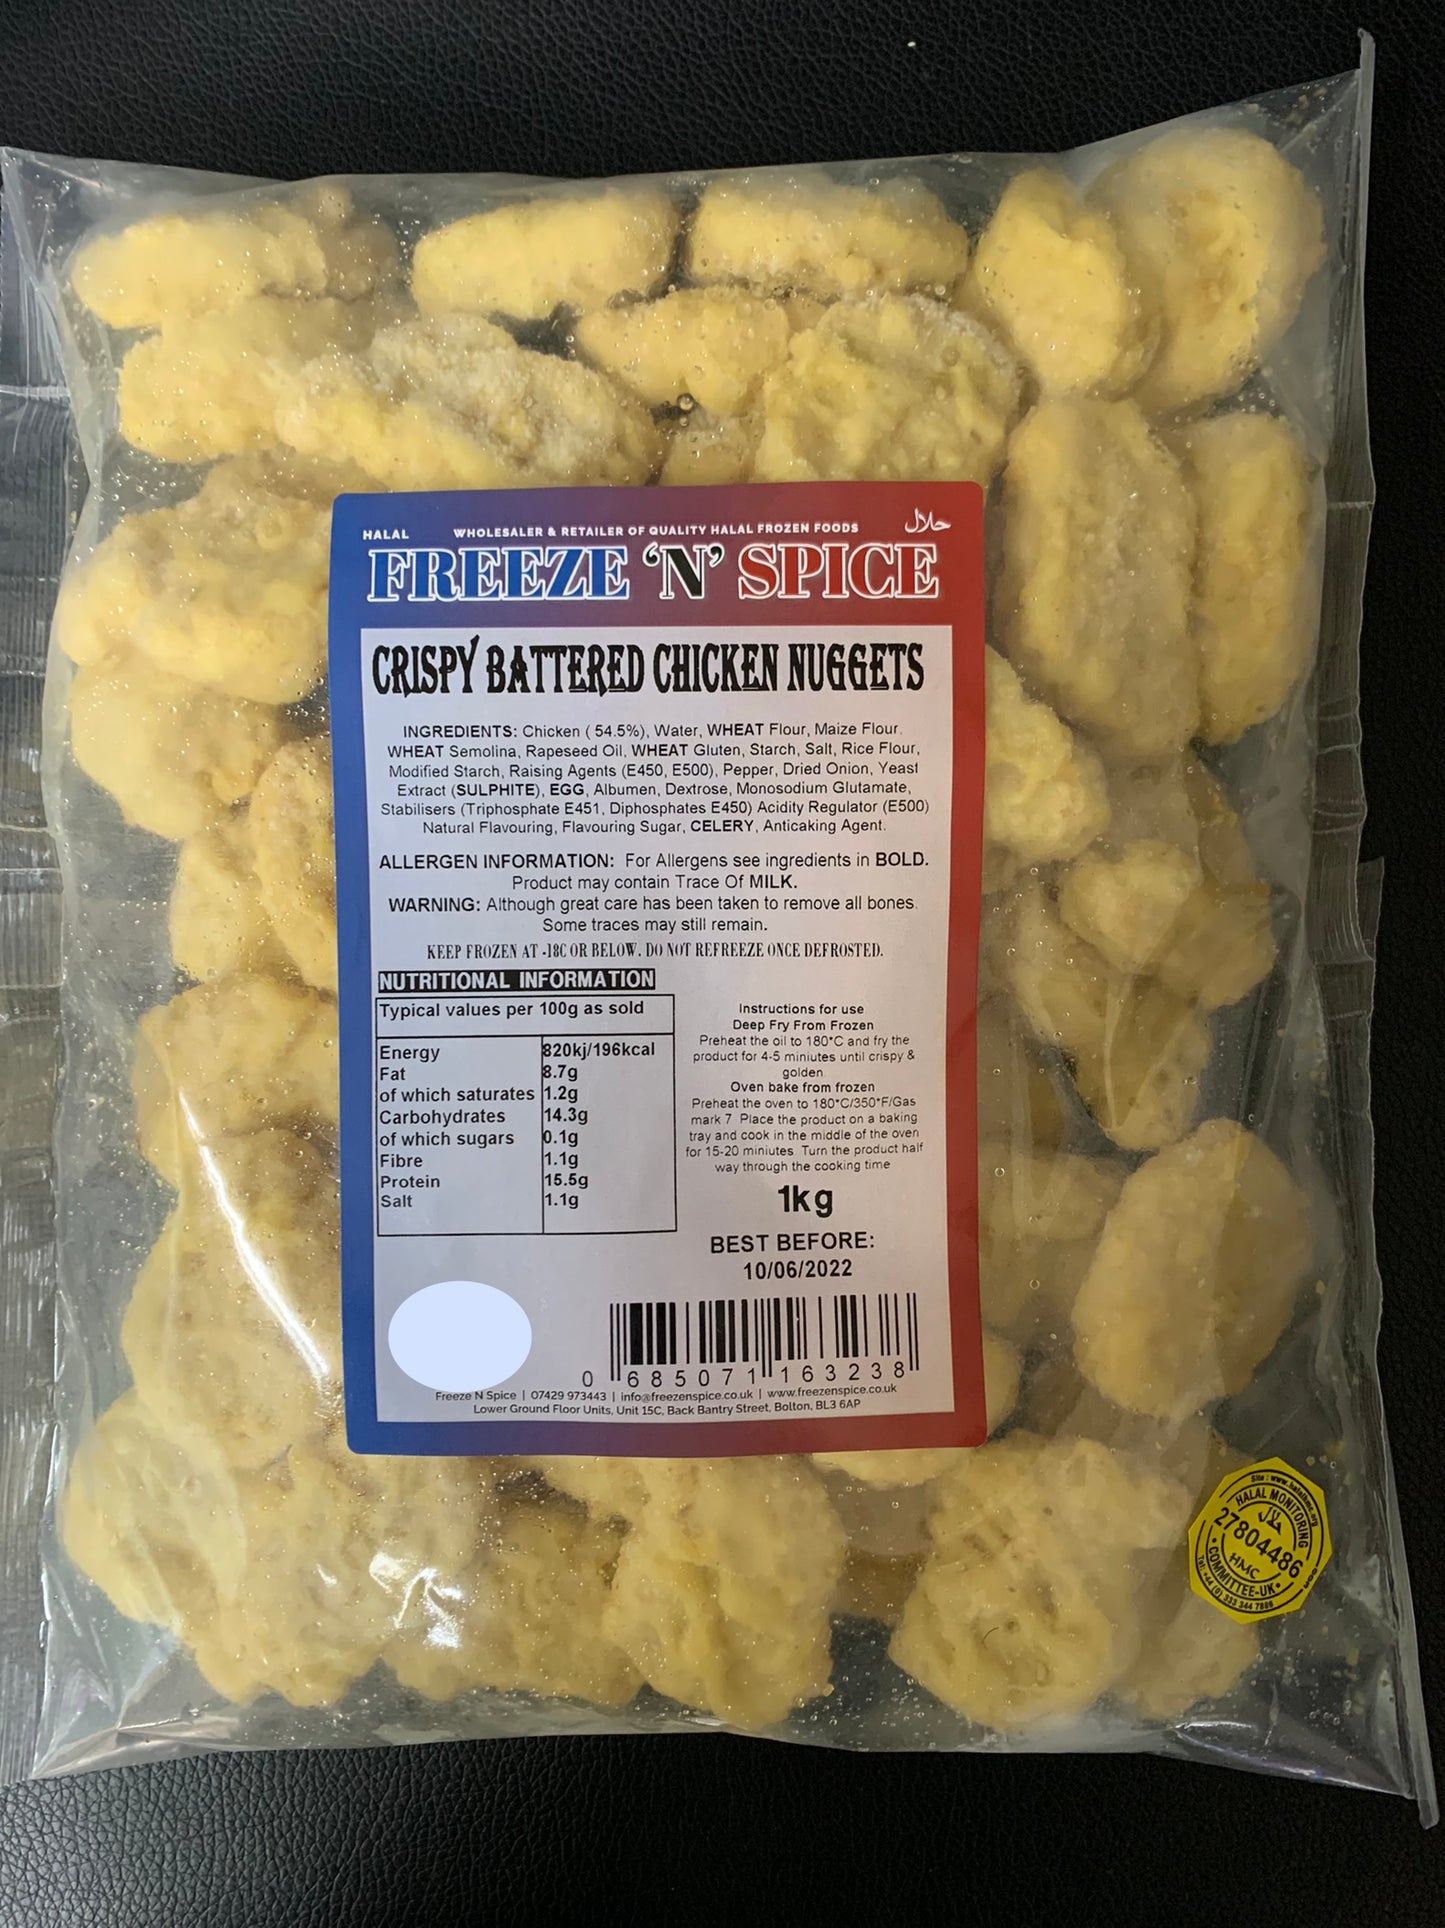 FnS Battered chicken Nuggets